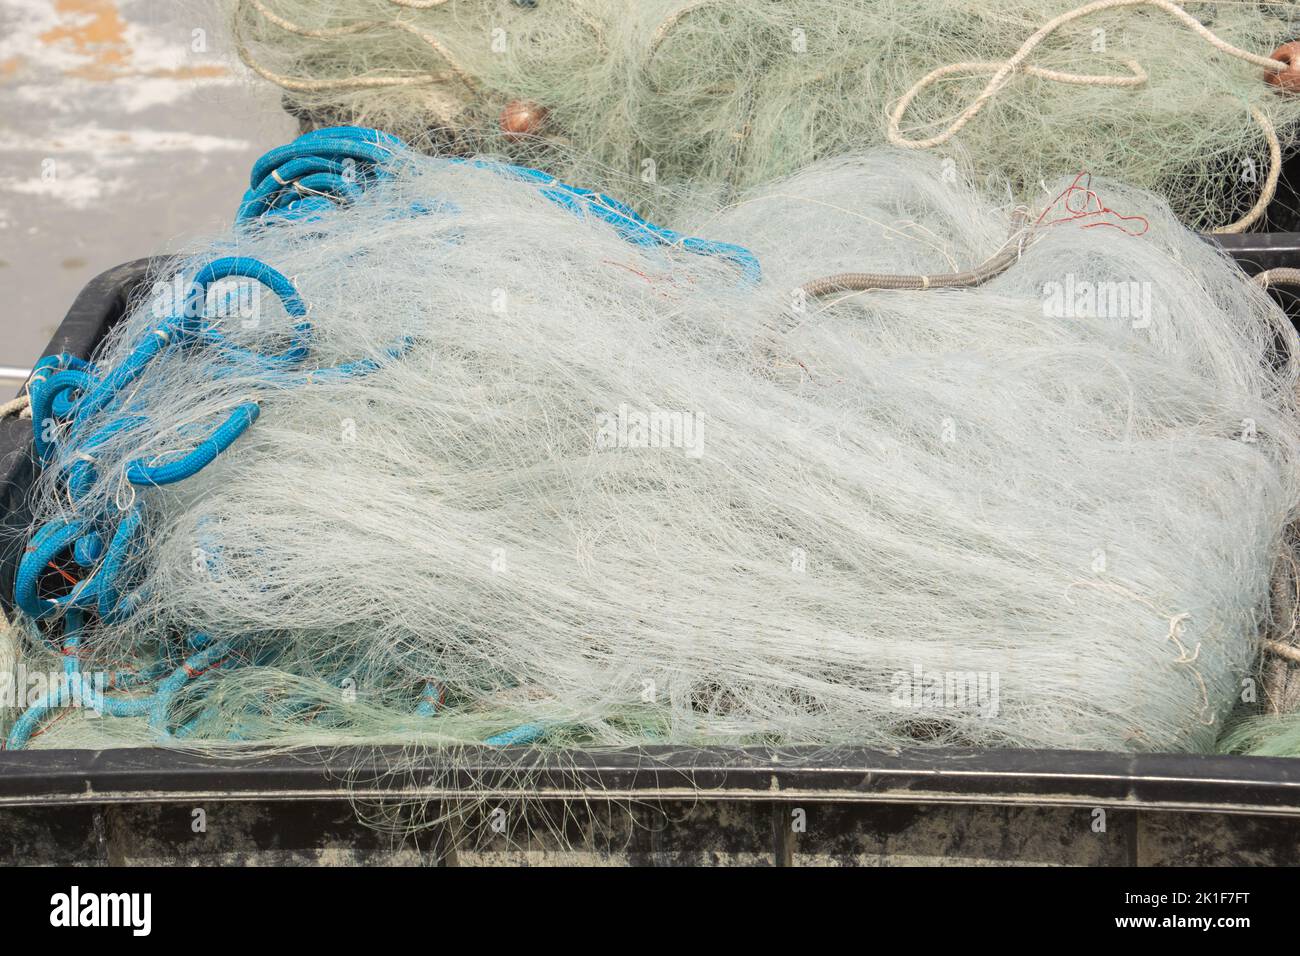 messy fine mesh fishing nets in a pile after use Stock Photo